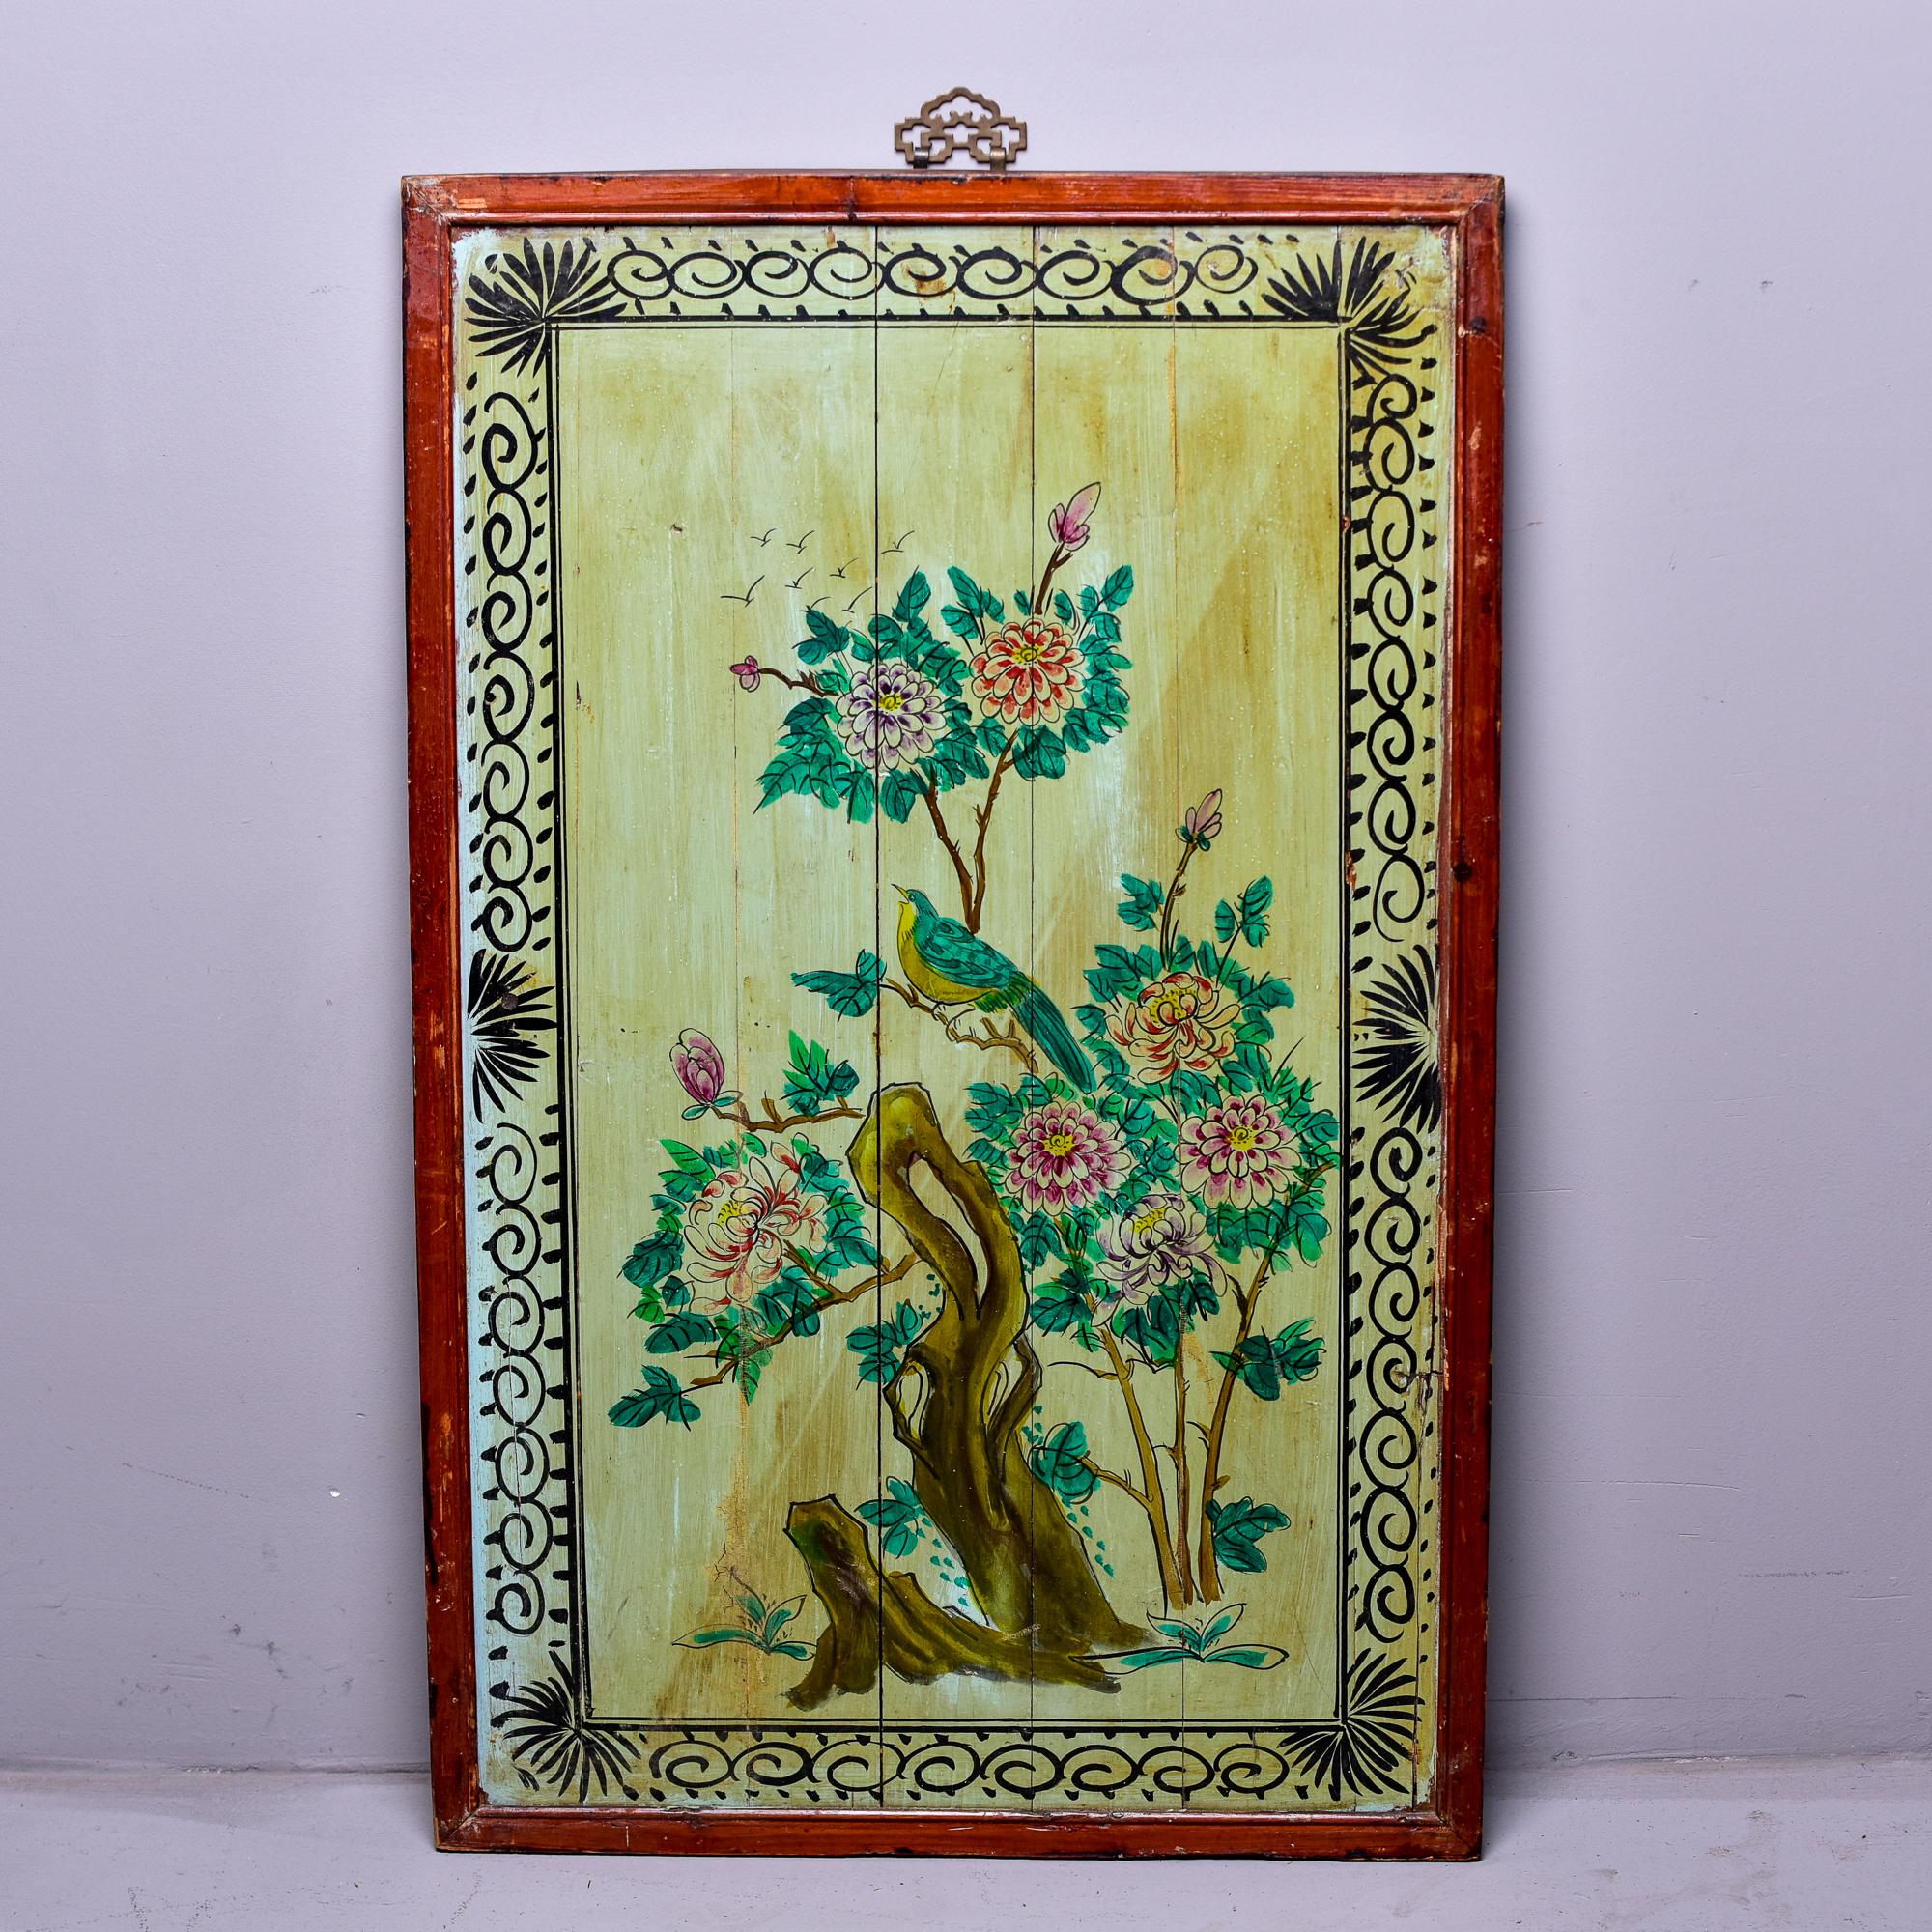 Circa 1900 Linhai wood panel with hand painted scene in green and fuchsia tones of a flowering tree with a bird. Painted black scrolled border and red edge. Decorative brass hanger at the top. 

Panel measures 38.5” high without brass hanging